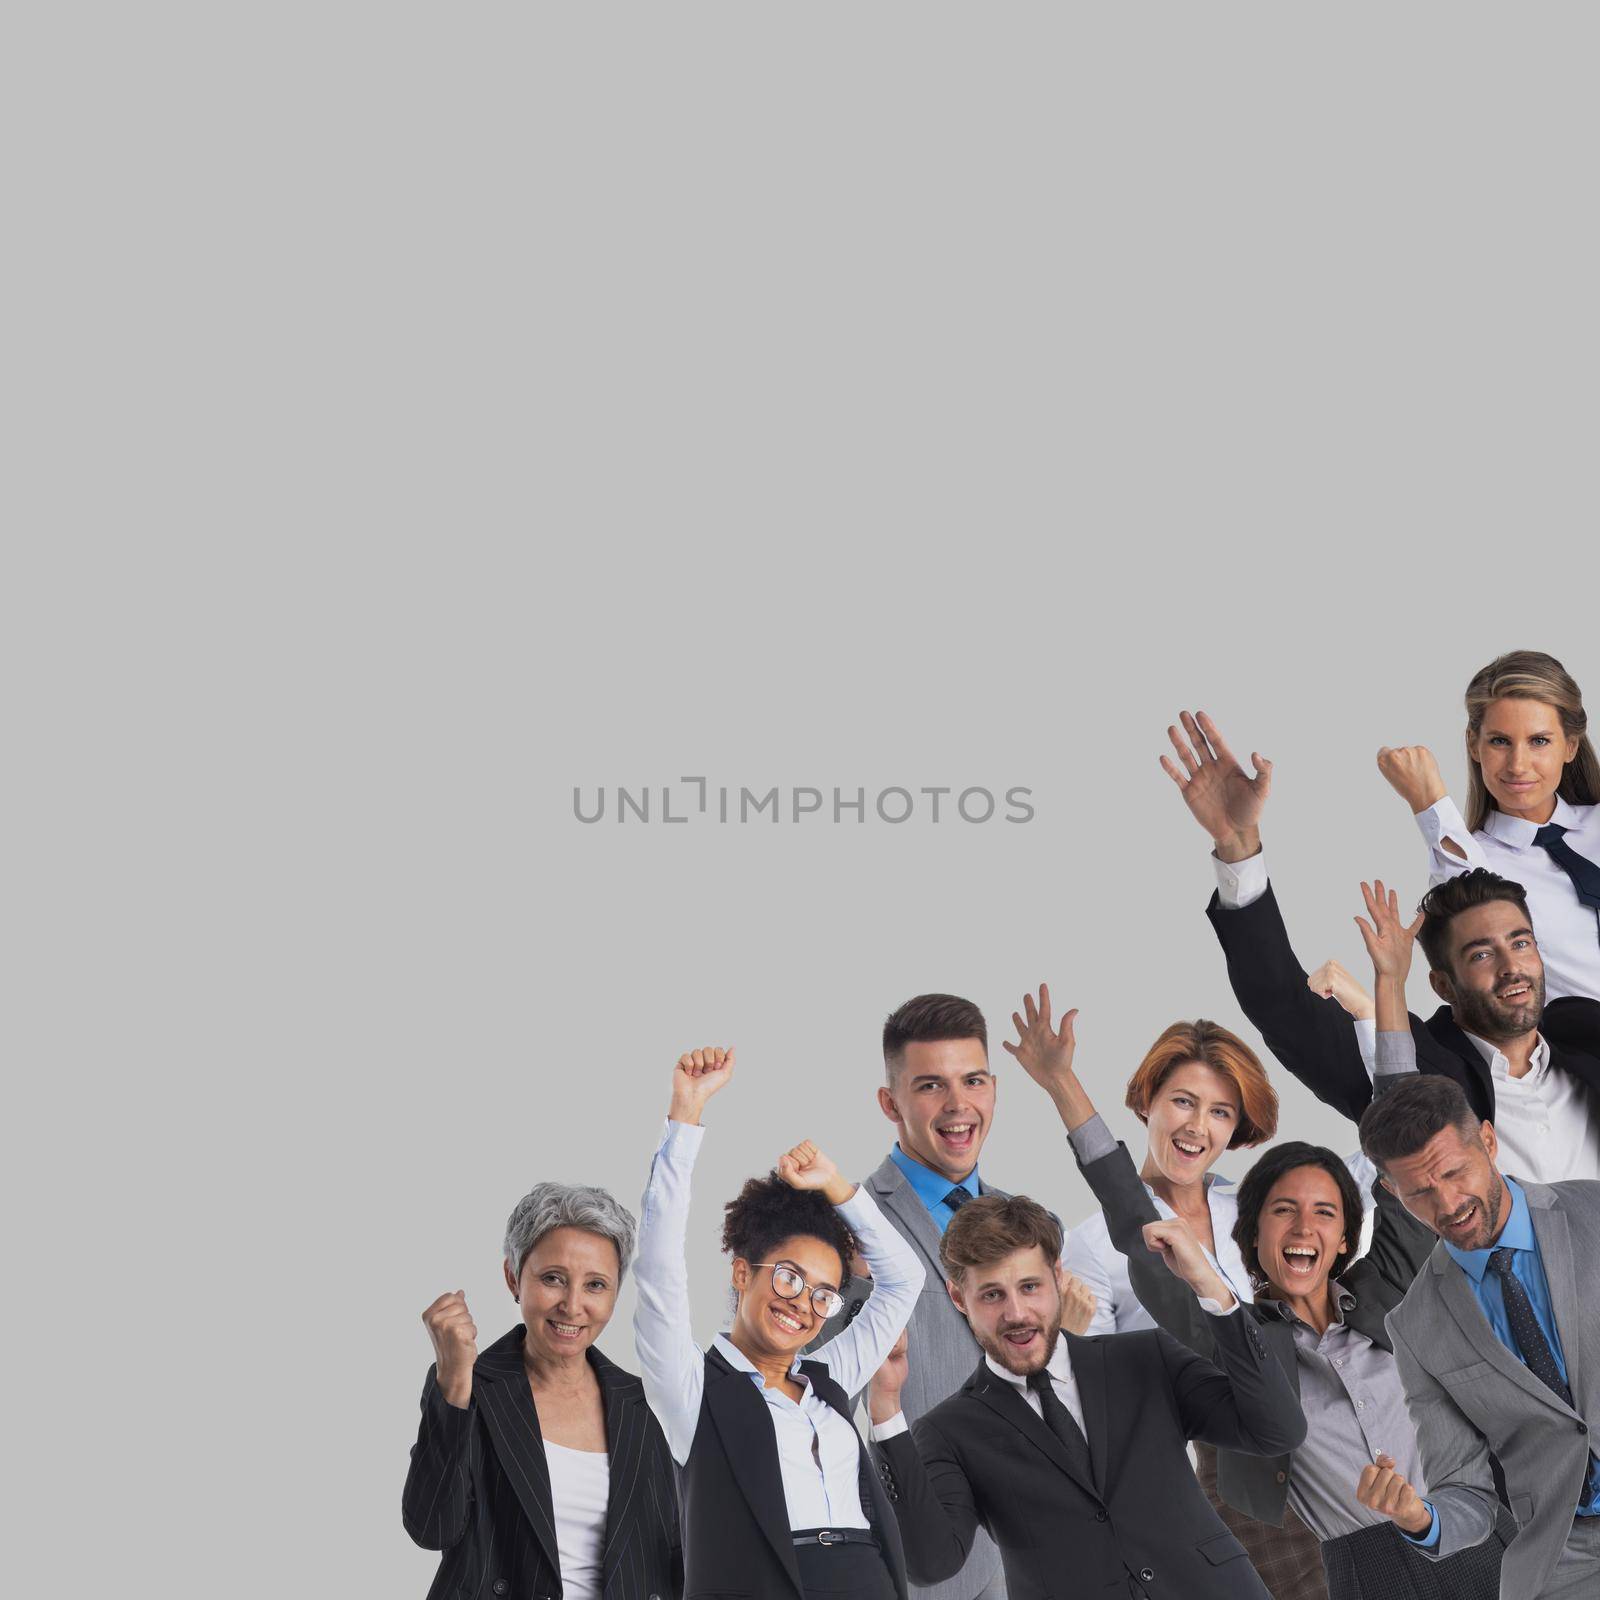 Large and very happy business group of people with arms raised over gray background corner design element